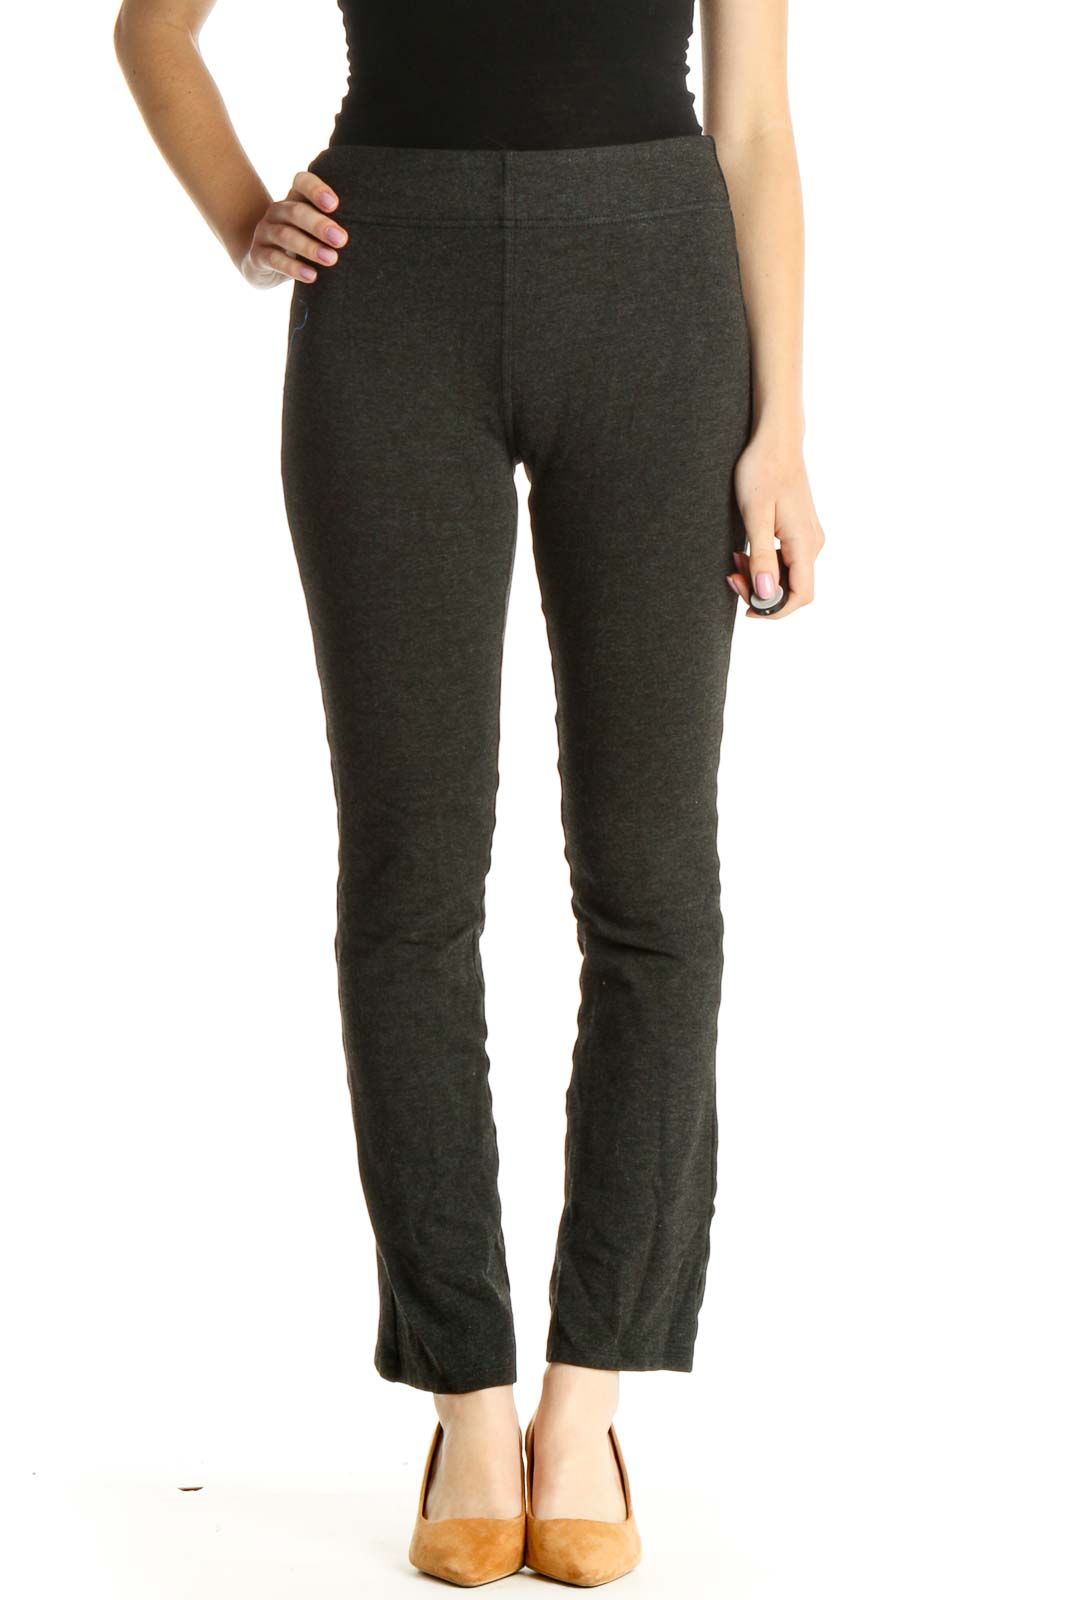 Gray Textured Casual Leggings Front